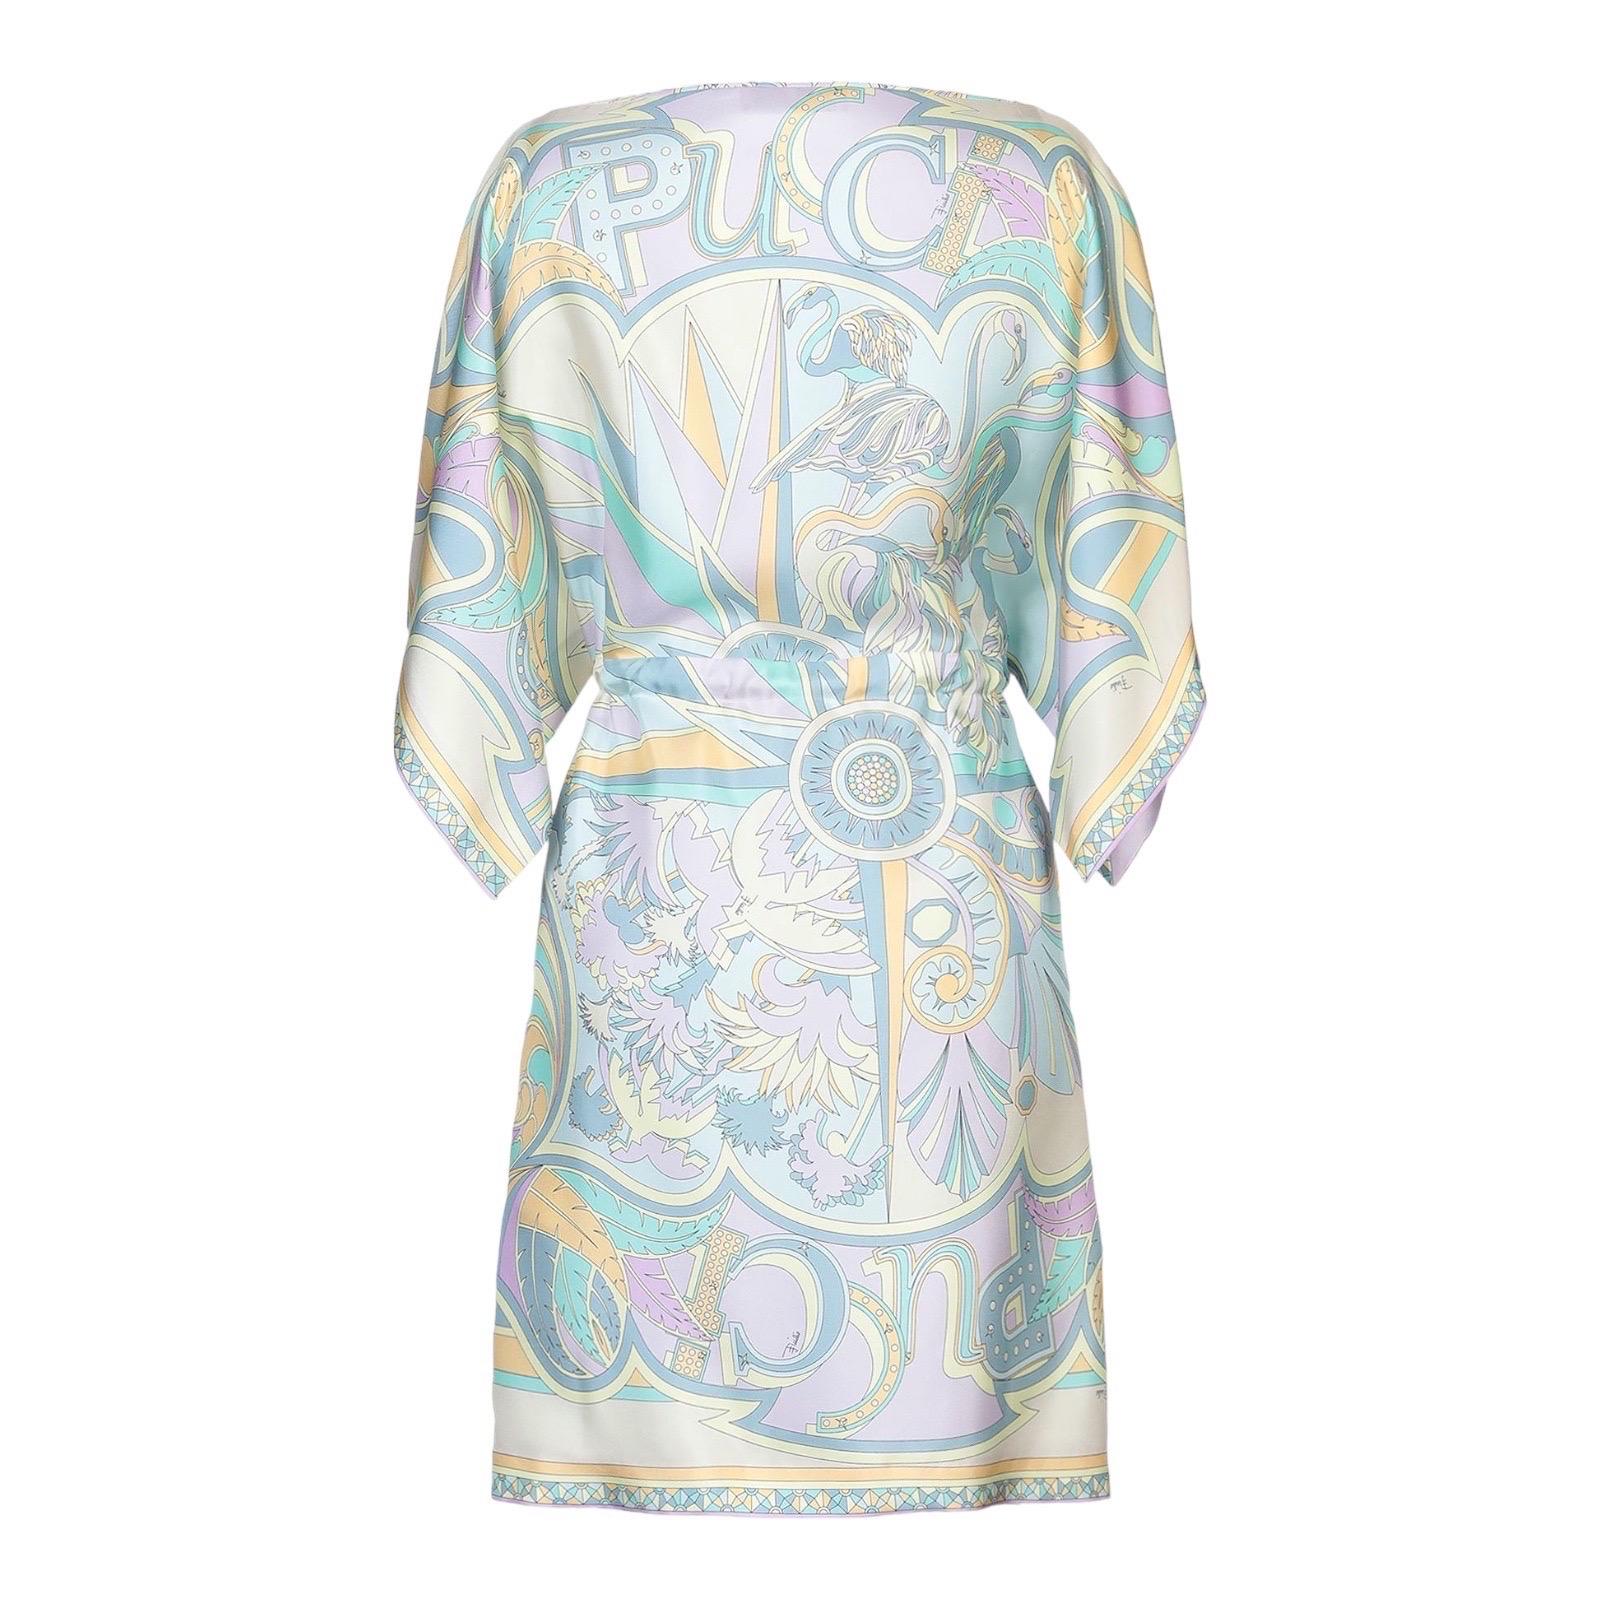 Inspired by Art Deco designs, Emilio Pucci's motif includes flamingos, palm trees and the brand's logo in pastel hues. This lustrous silk-twill dress has a drawstring waistband and wide sleeves that are split to create beautiful movement. Whether